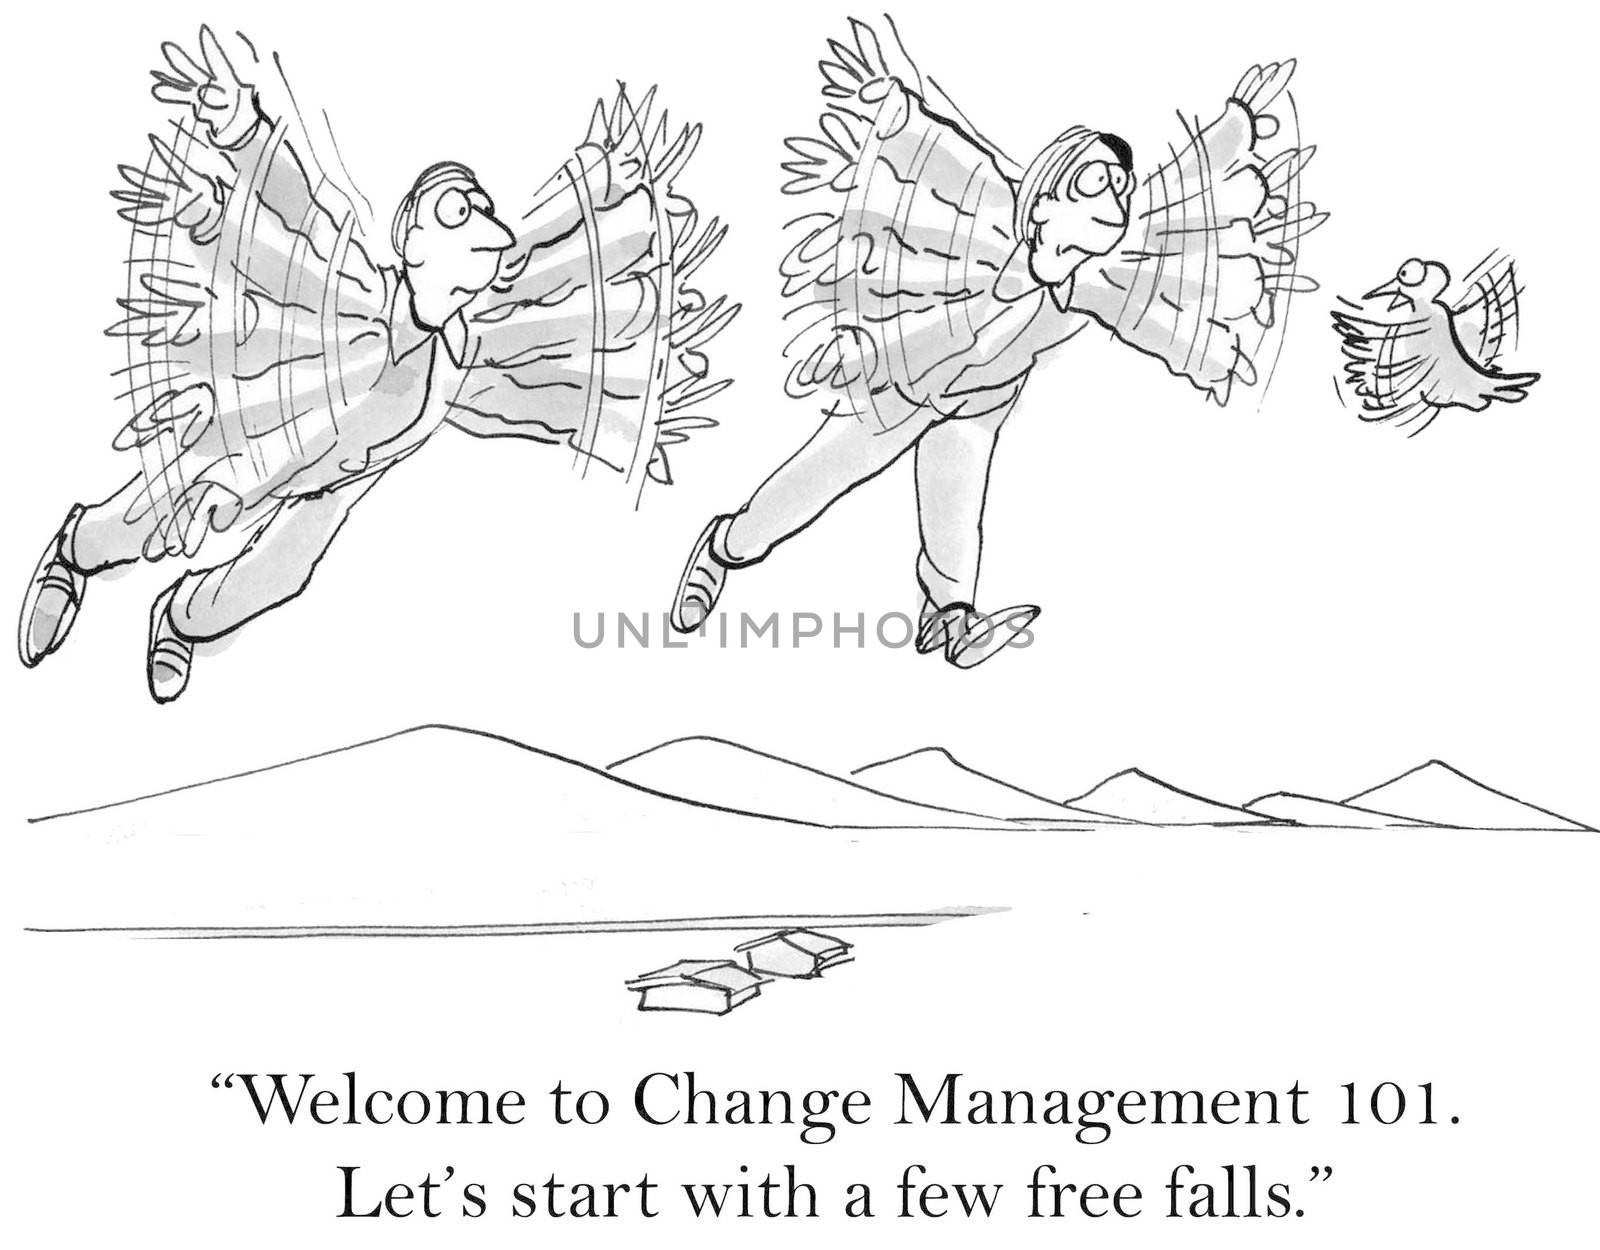 "Welcome to Change Management 101. Let's start with a few free falls."